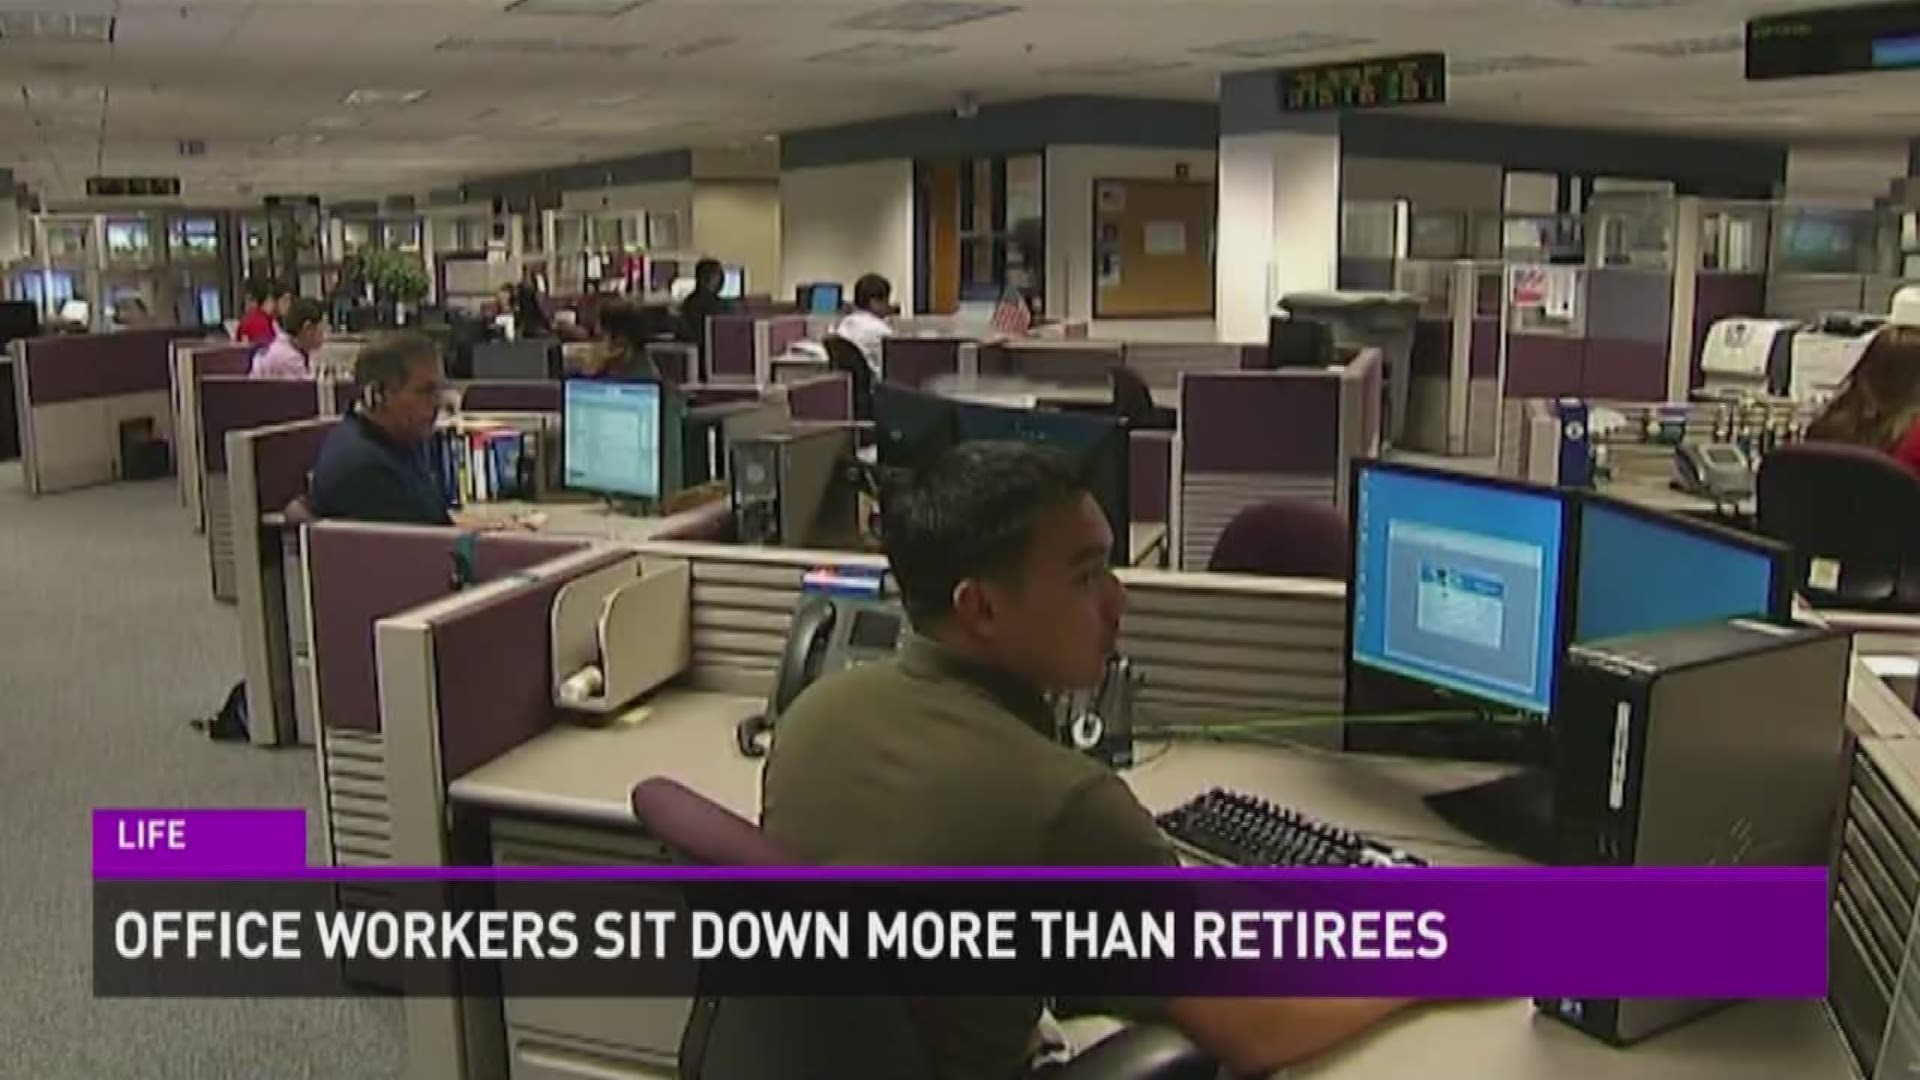 Most middle-aged office workers now spend more time sitting down than their retired peers.